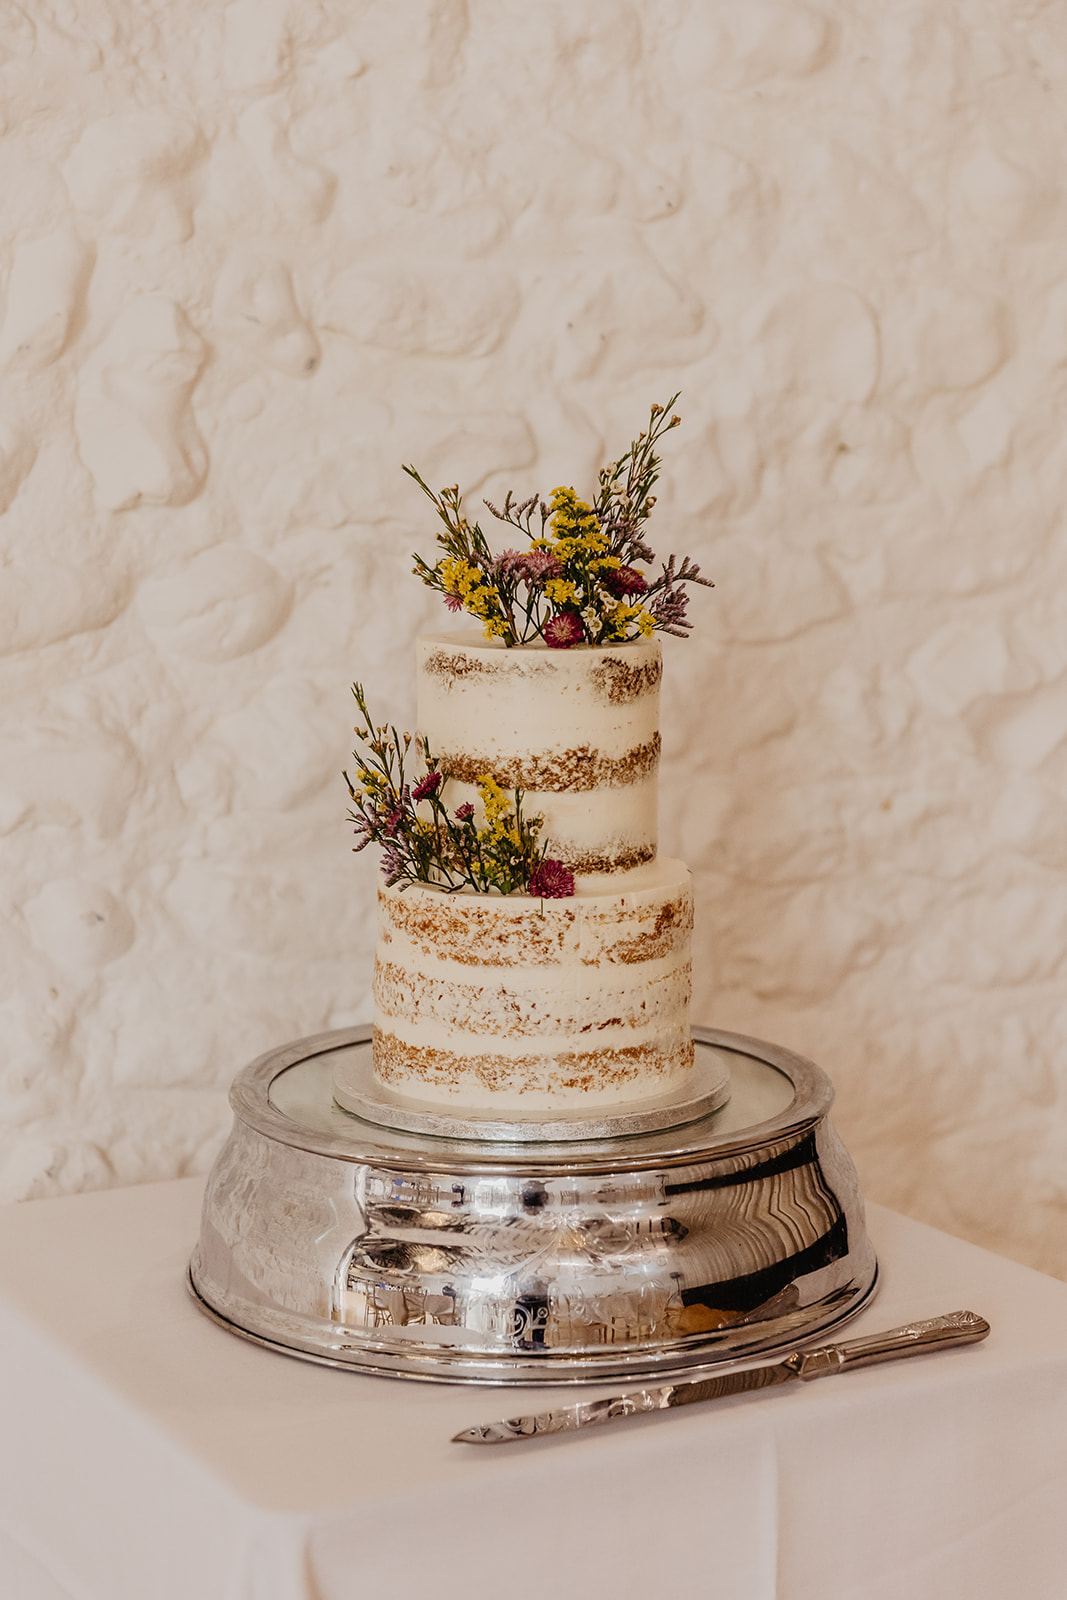 Wedding cake at Field Place Wedding Worthing, Sussex. By OliveJoy Photography.